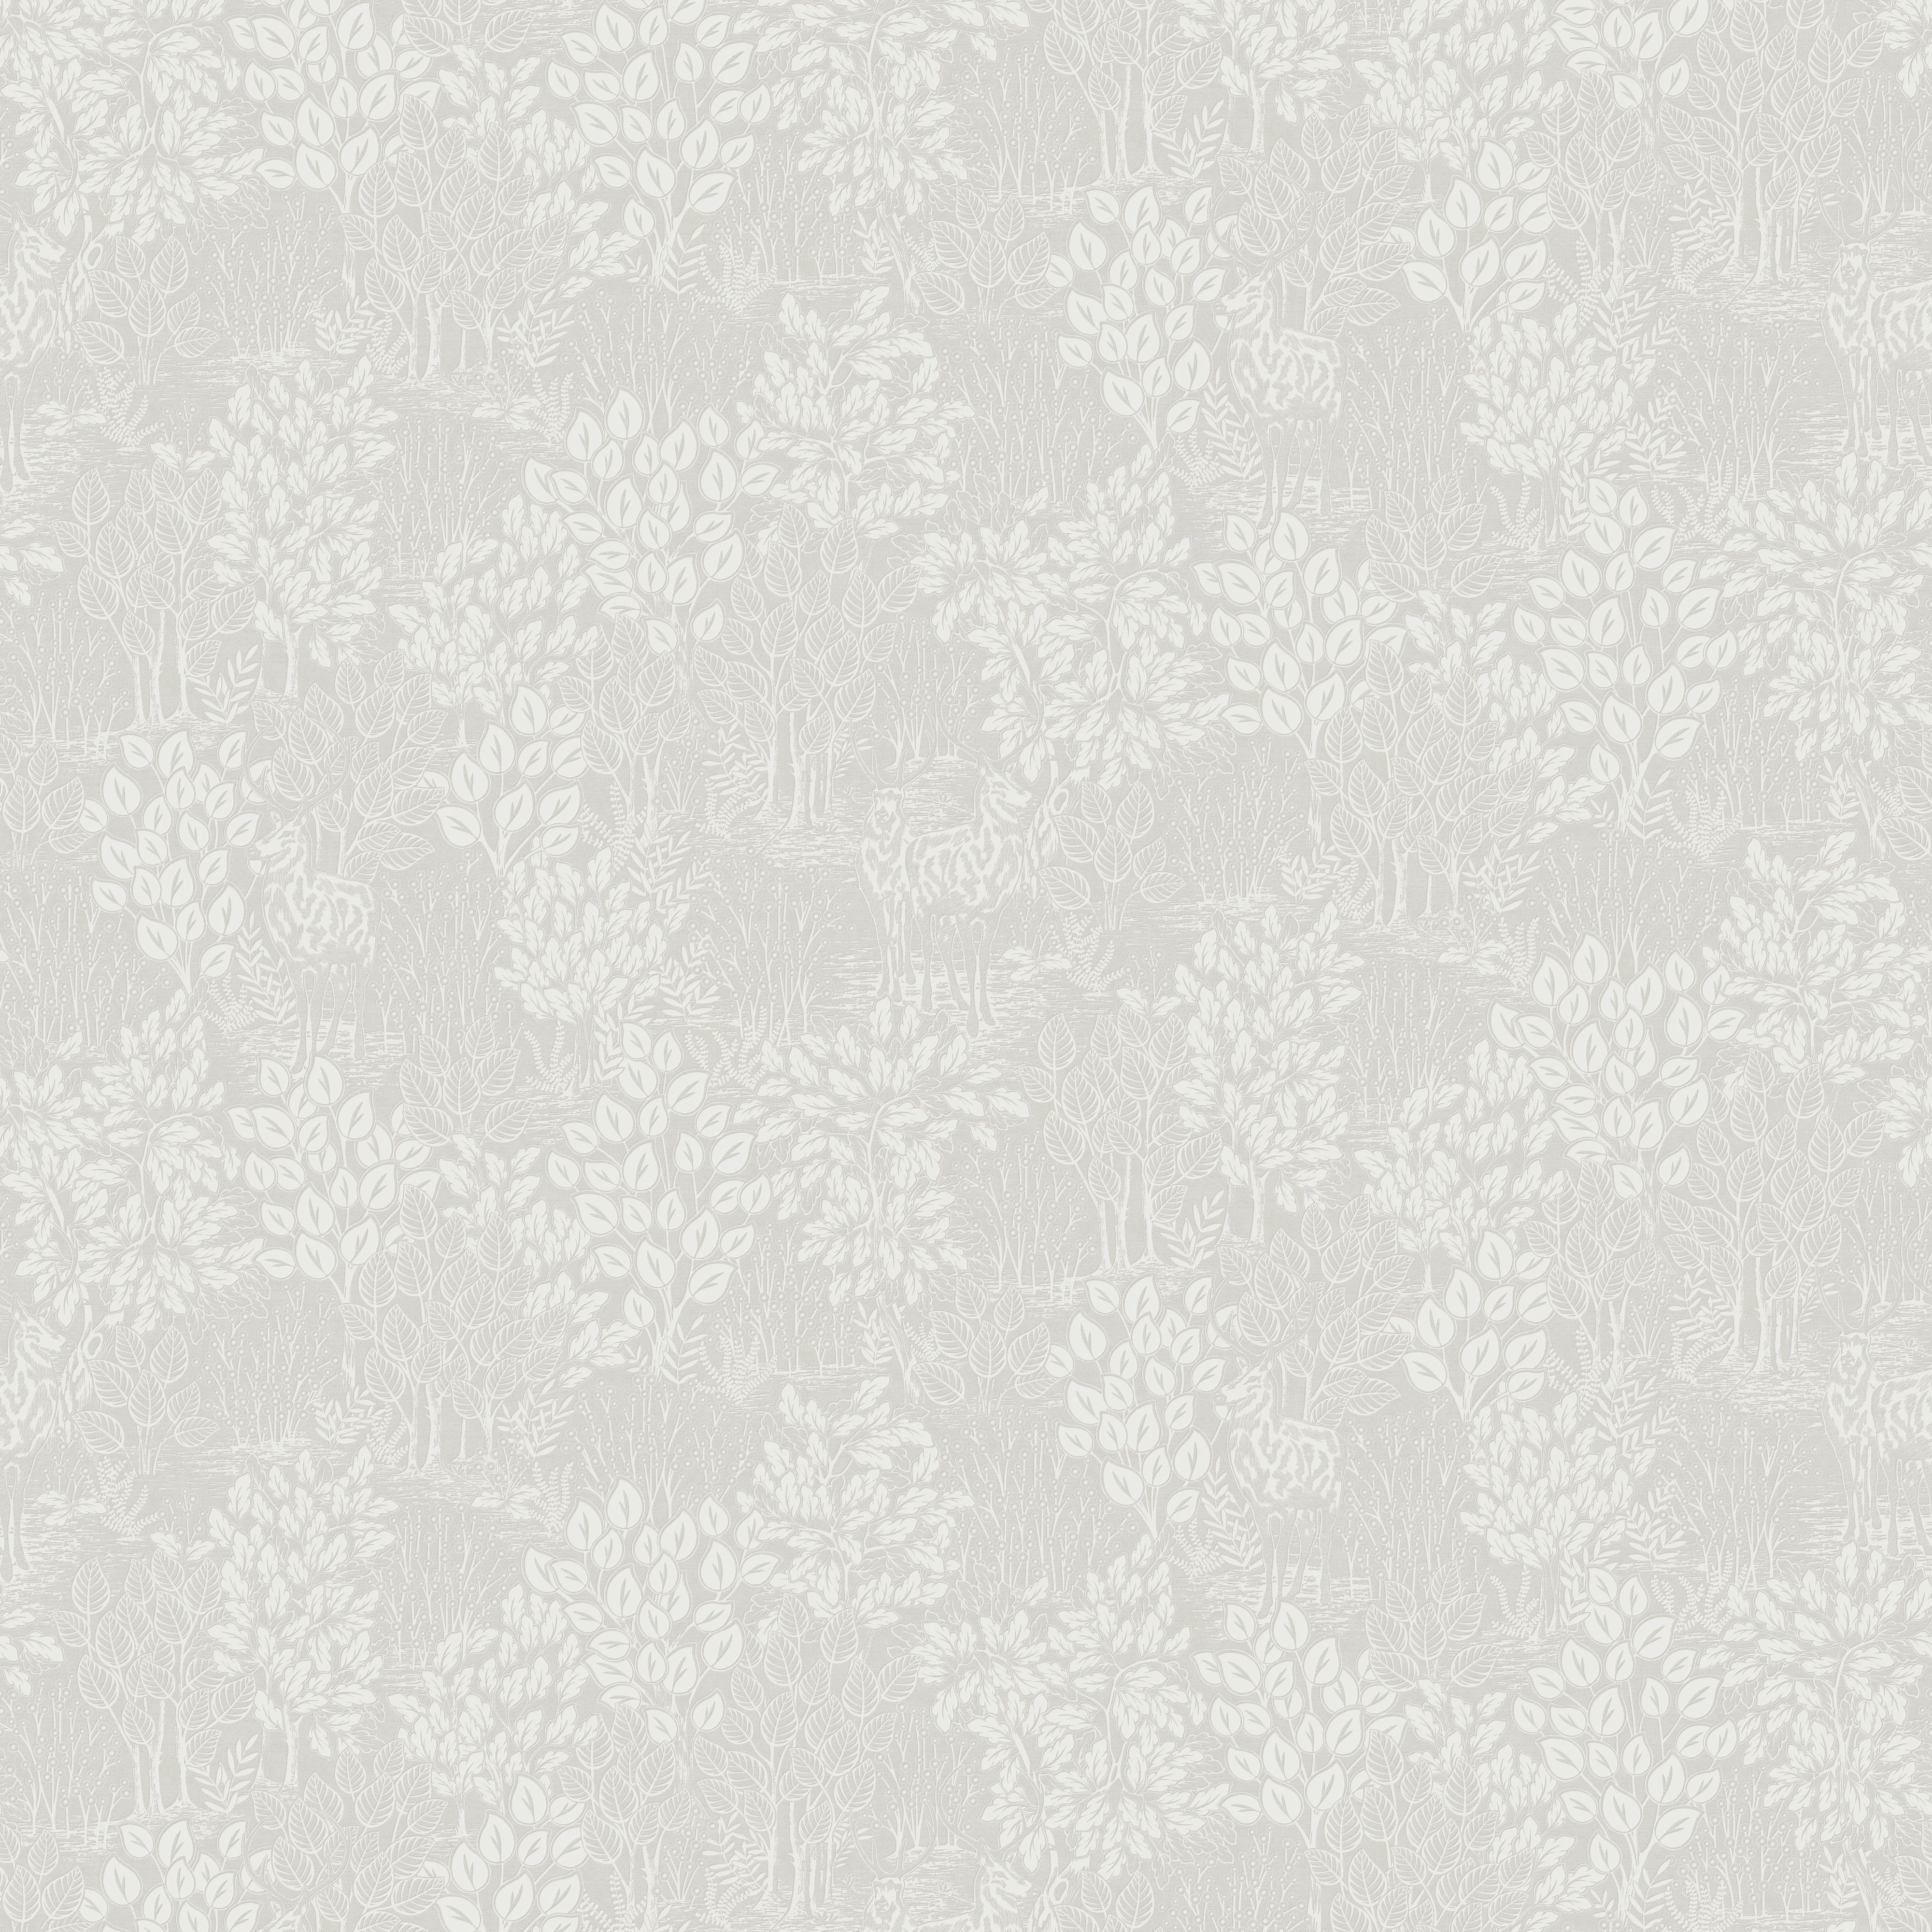 Holden Décor Opus Majella Taupe Etched woodland Embossed Wallpaper ...